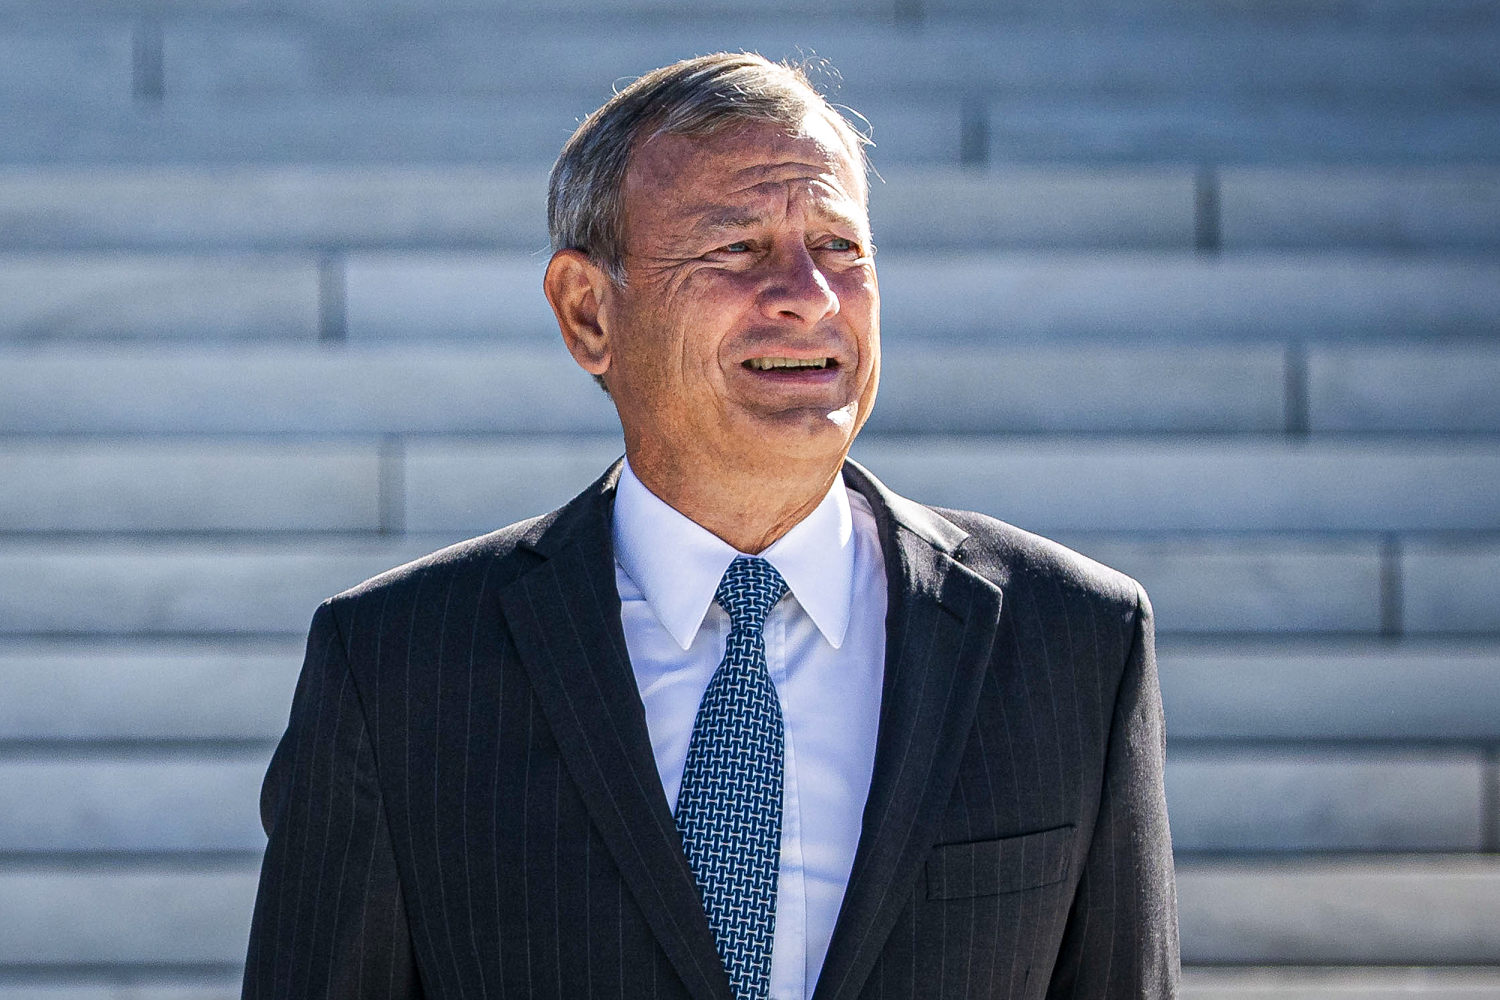 John Roberts has done what the Founders never could have imagined